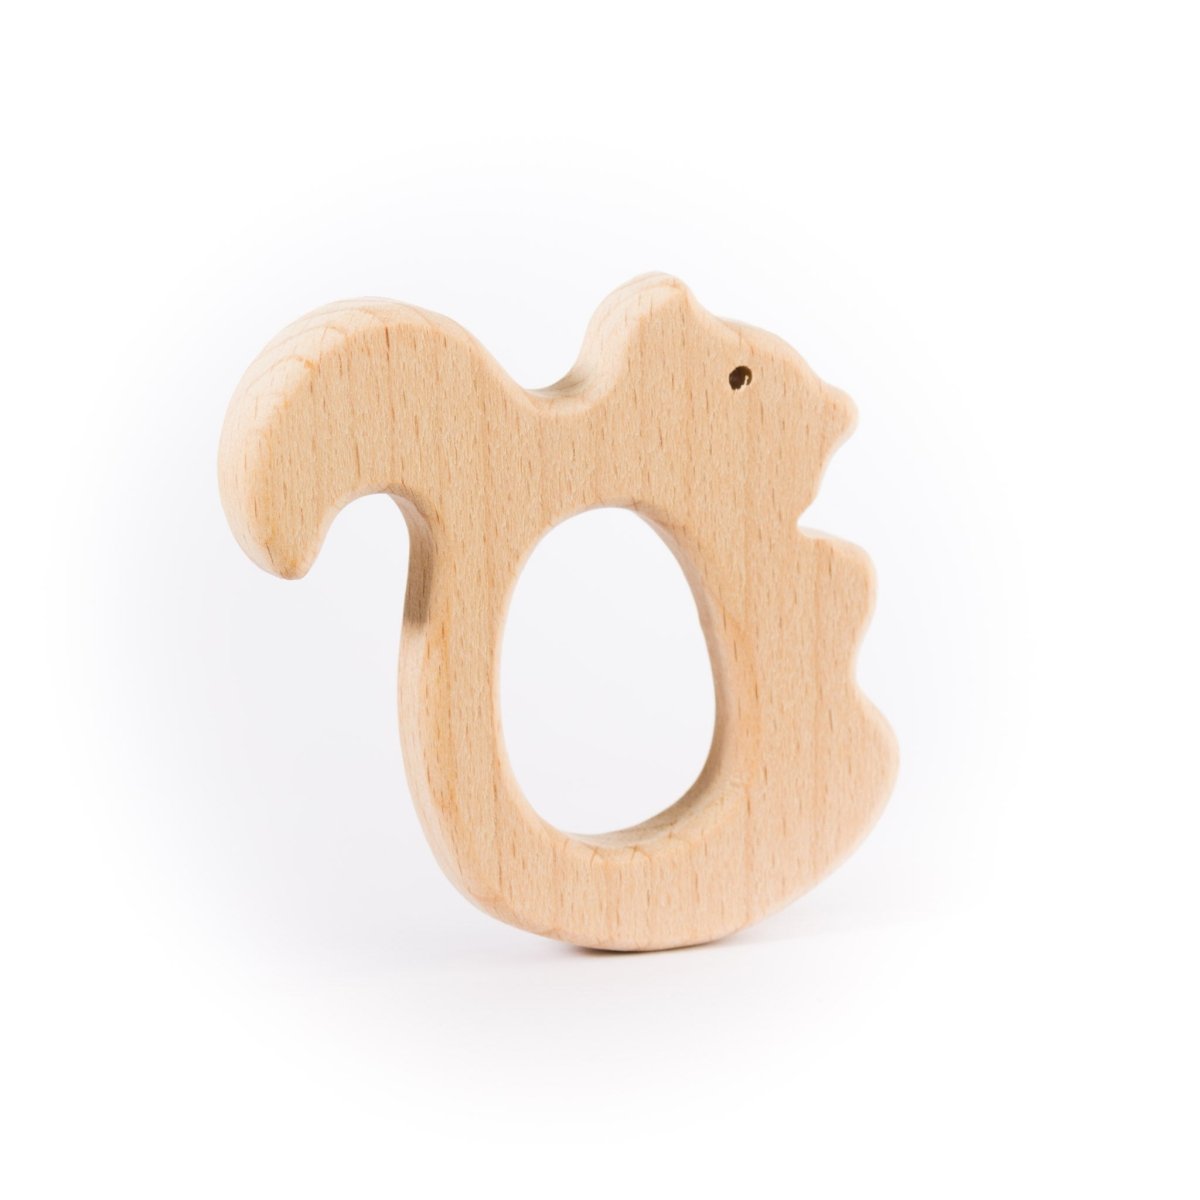 Wood Rings & Pendants Small - Beech Wood Squirrel from Cara & Co Craft Supply